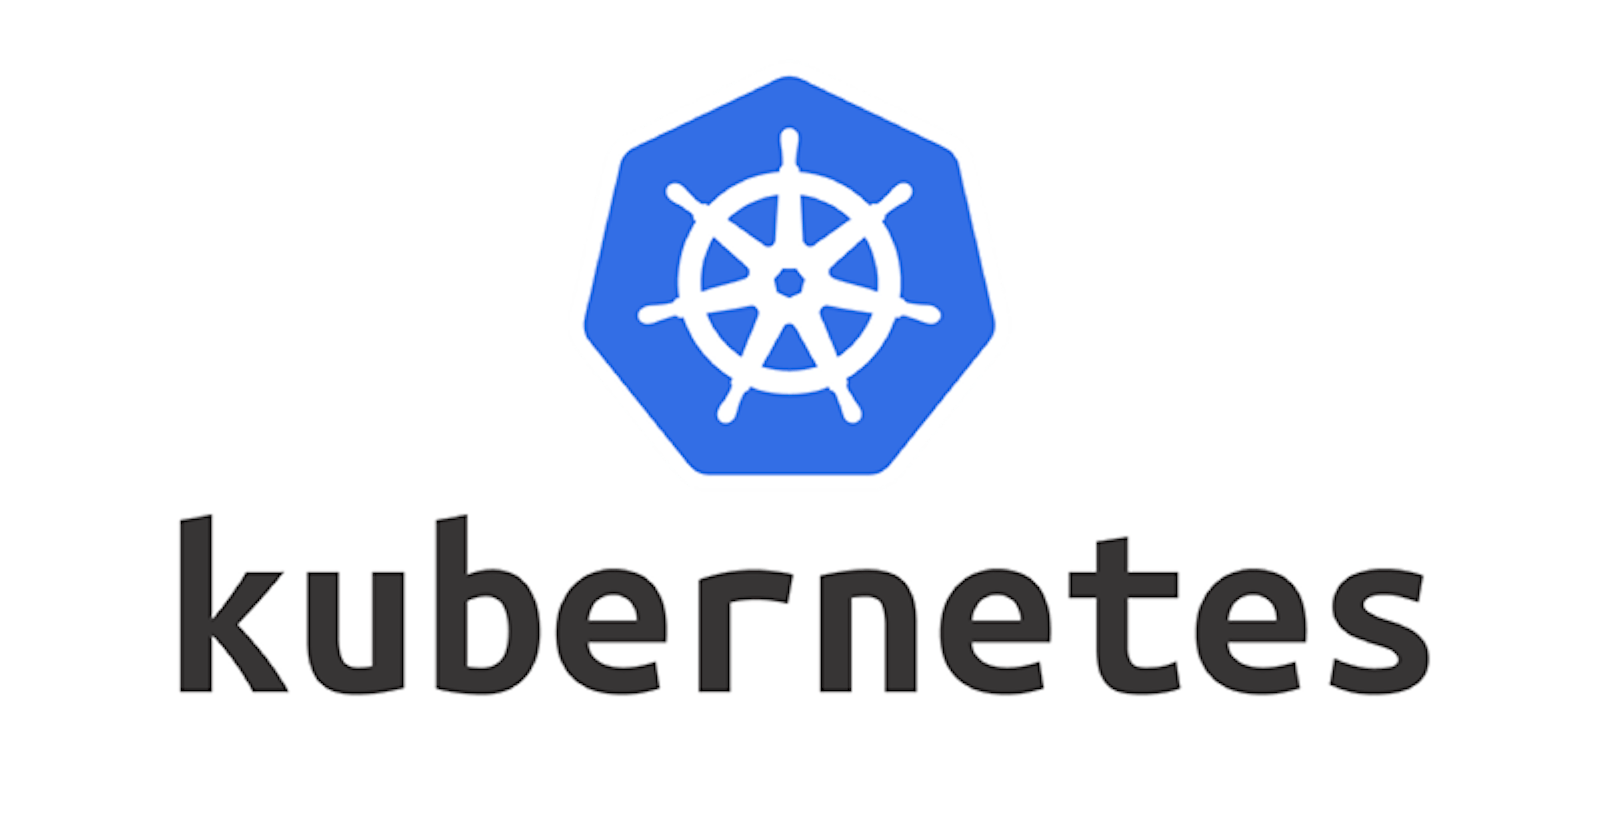 Kubernetes Architecture and Components,
Kubernetes Installation and Configuration